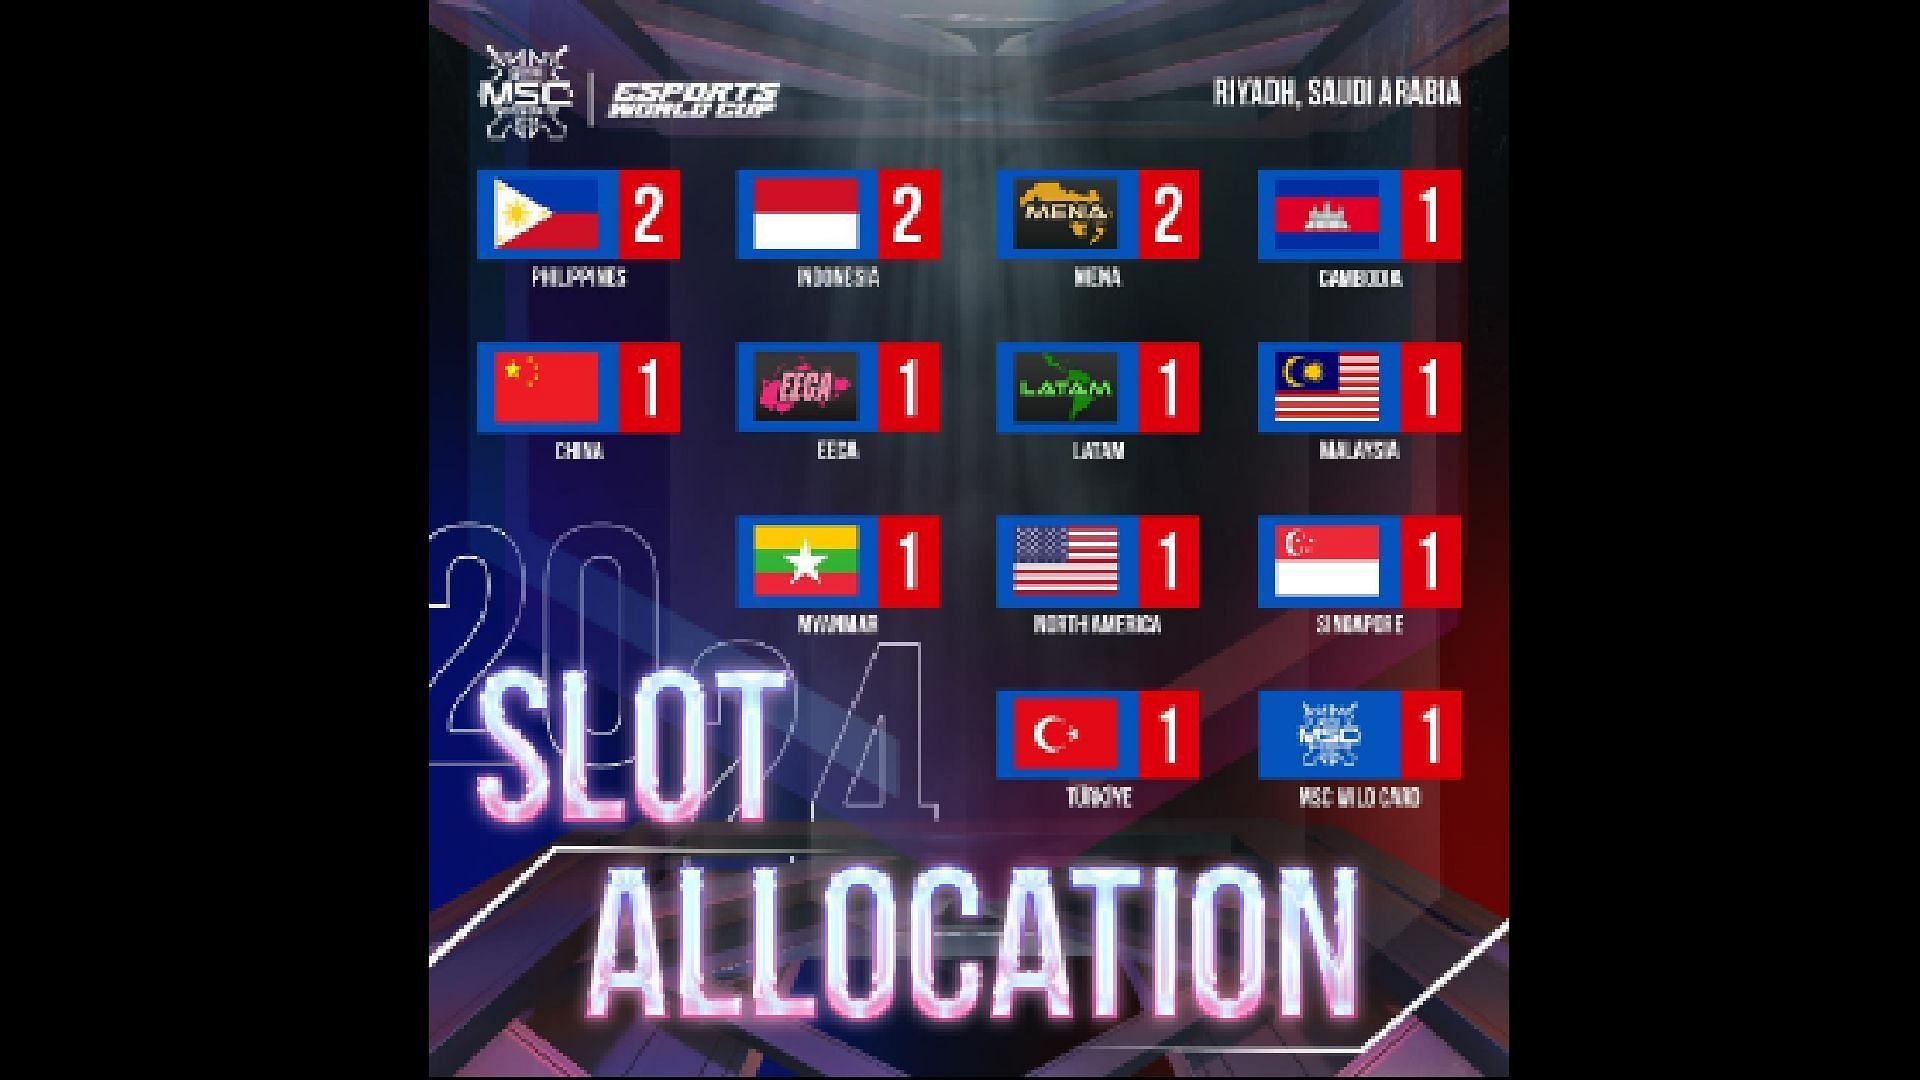 Main Stage slot allocation for Mid Season Cup 2024 (Image via Moonton Games)